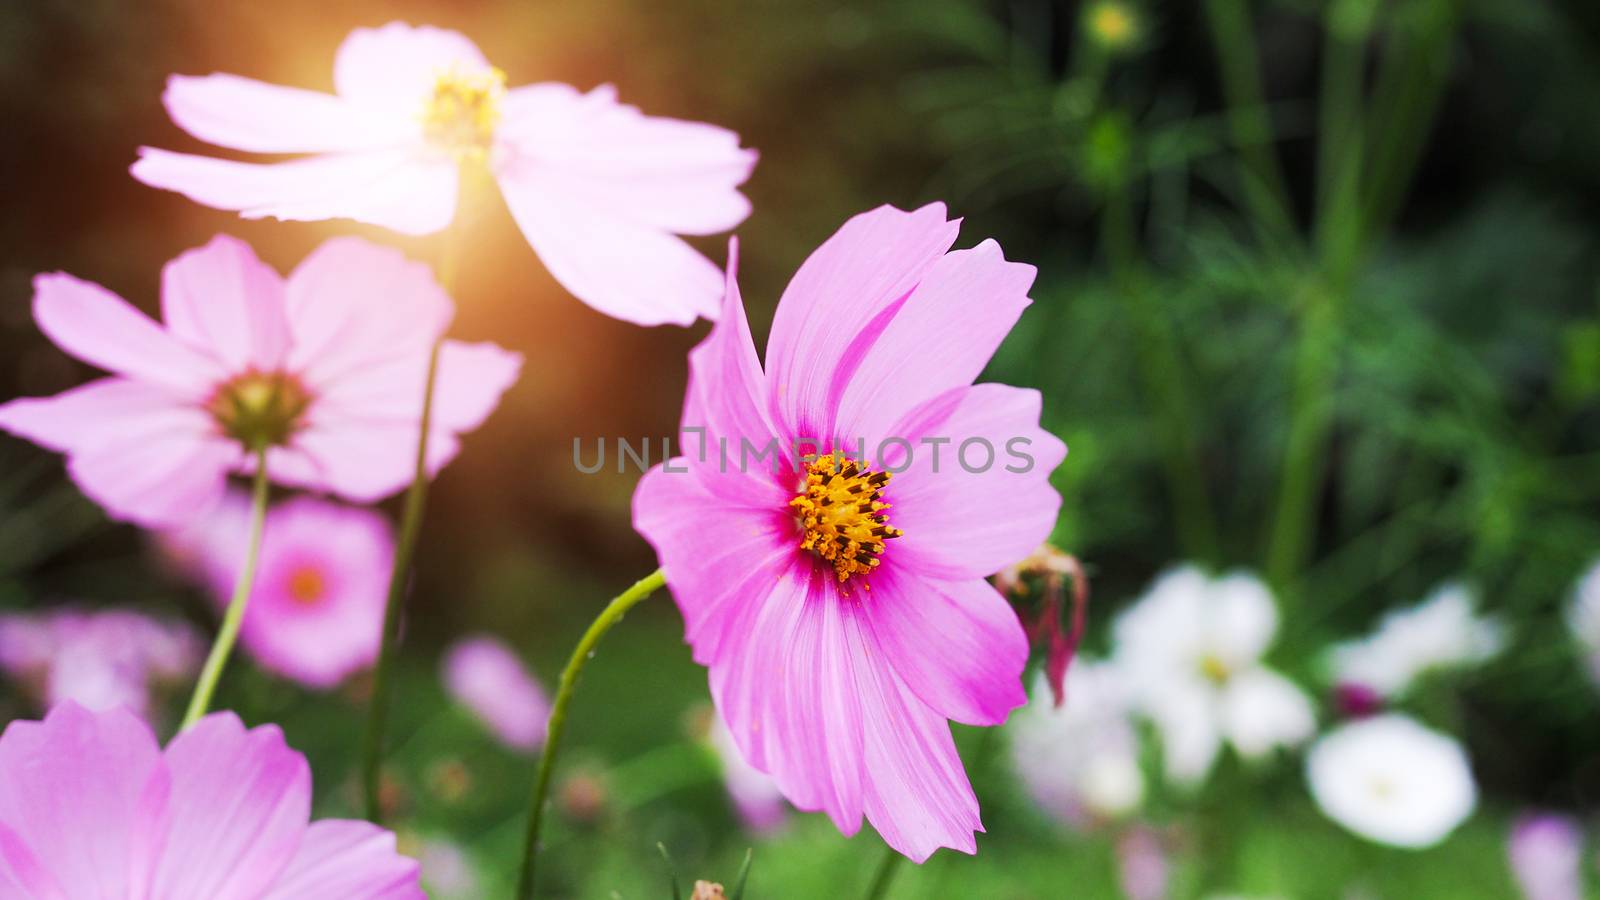 Pink flowers blooming in the garden Cosmos flowers in the park Beautiful nature background